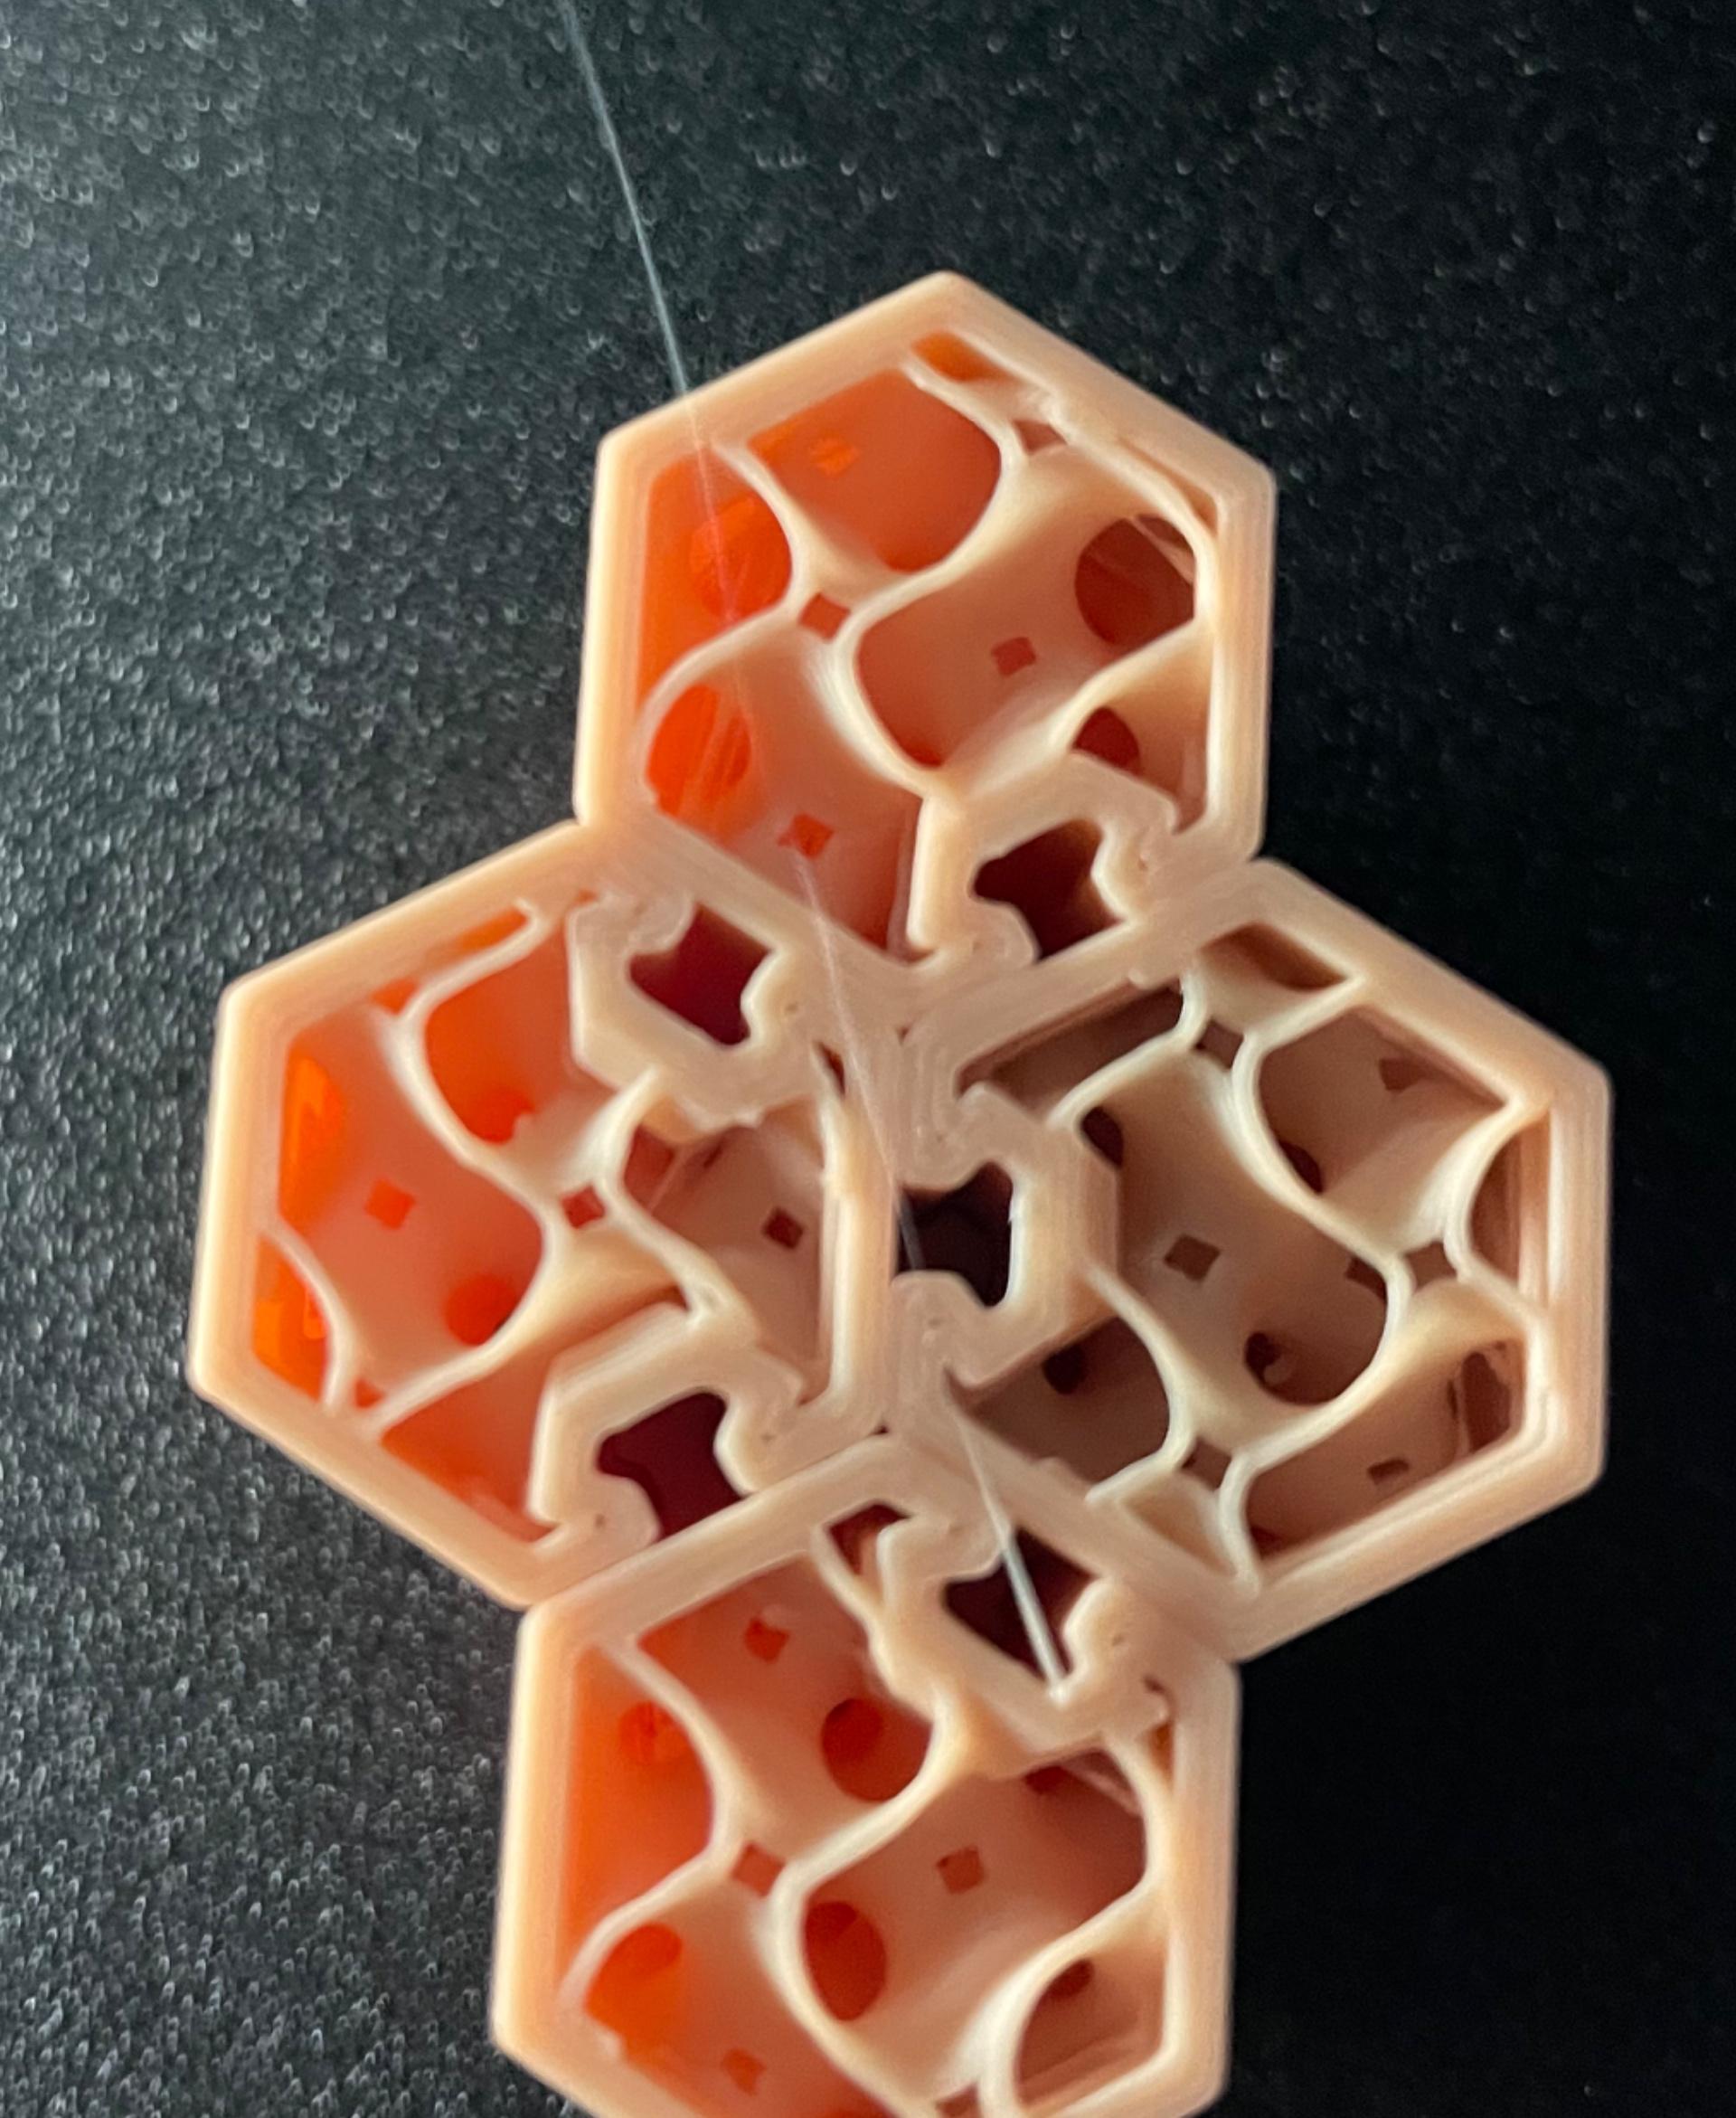 Easy Print Fexahidget - no way this is going to be not fused … will try a completely different filament in case this issue is filament specific  - 3d model